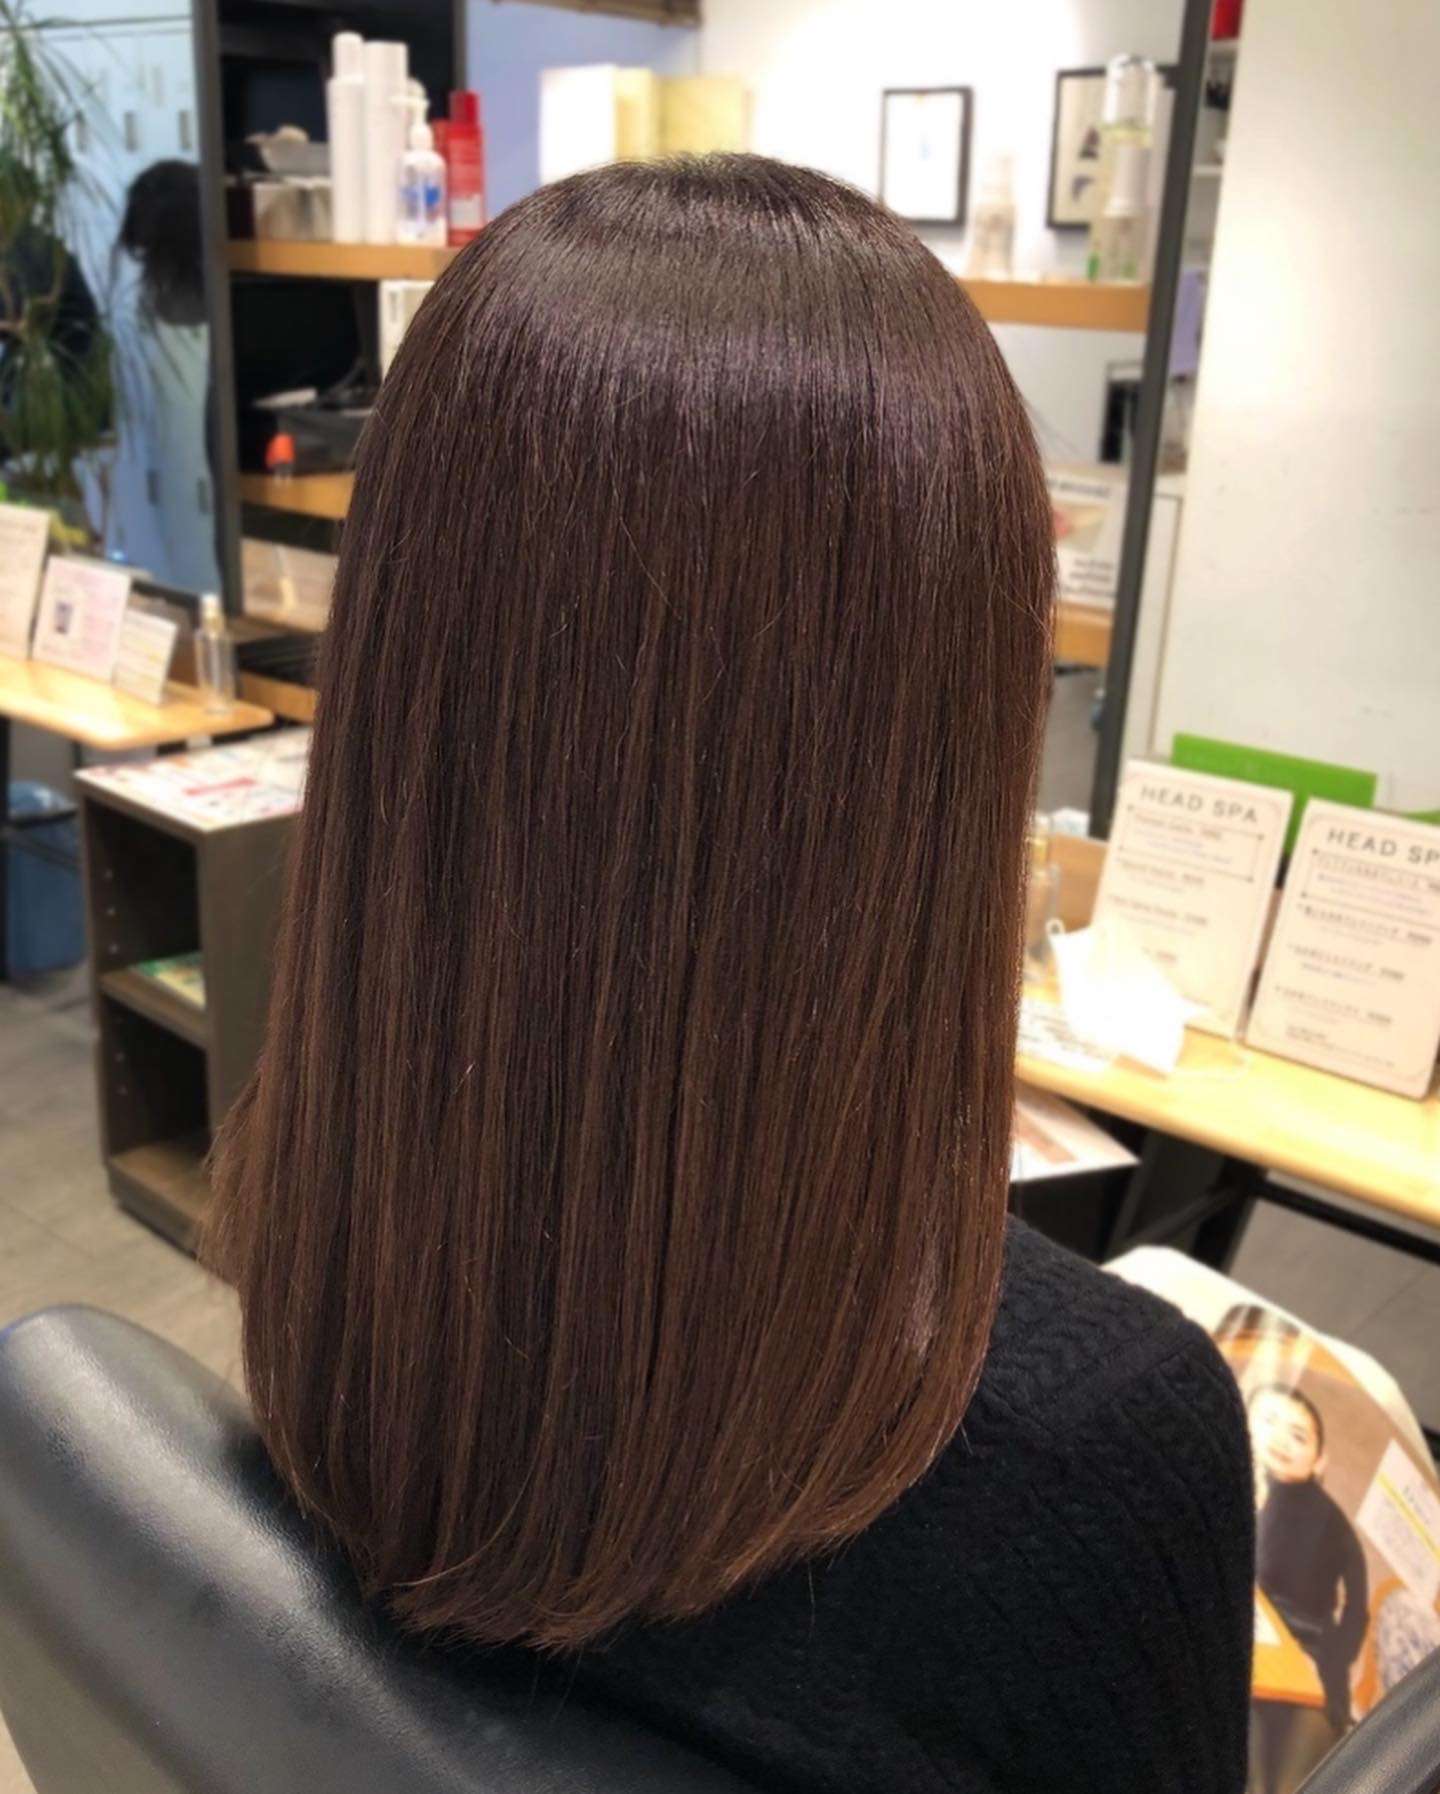 [Nagoya × Hair Salon] Color is organic at the same time as treatment ♪